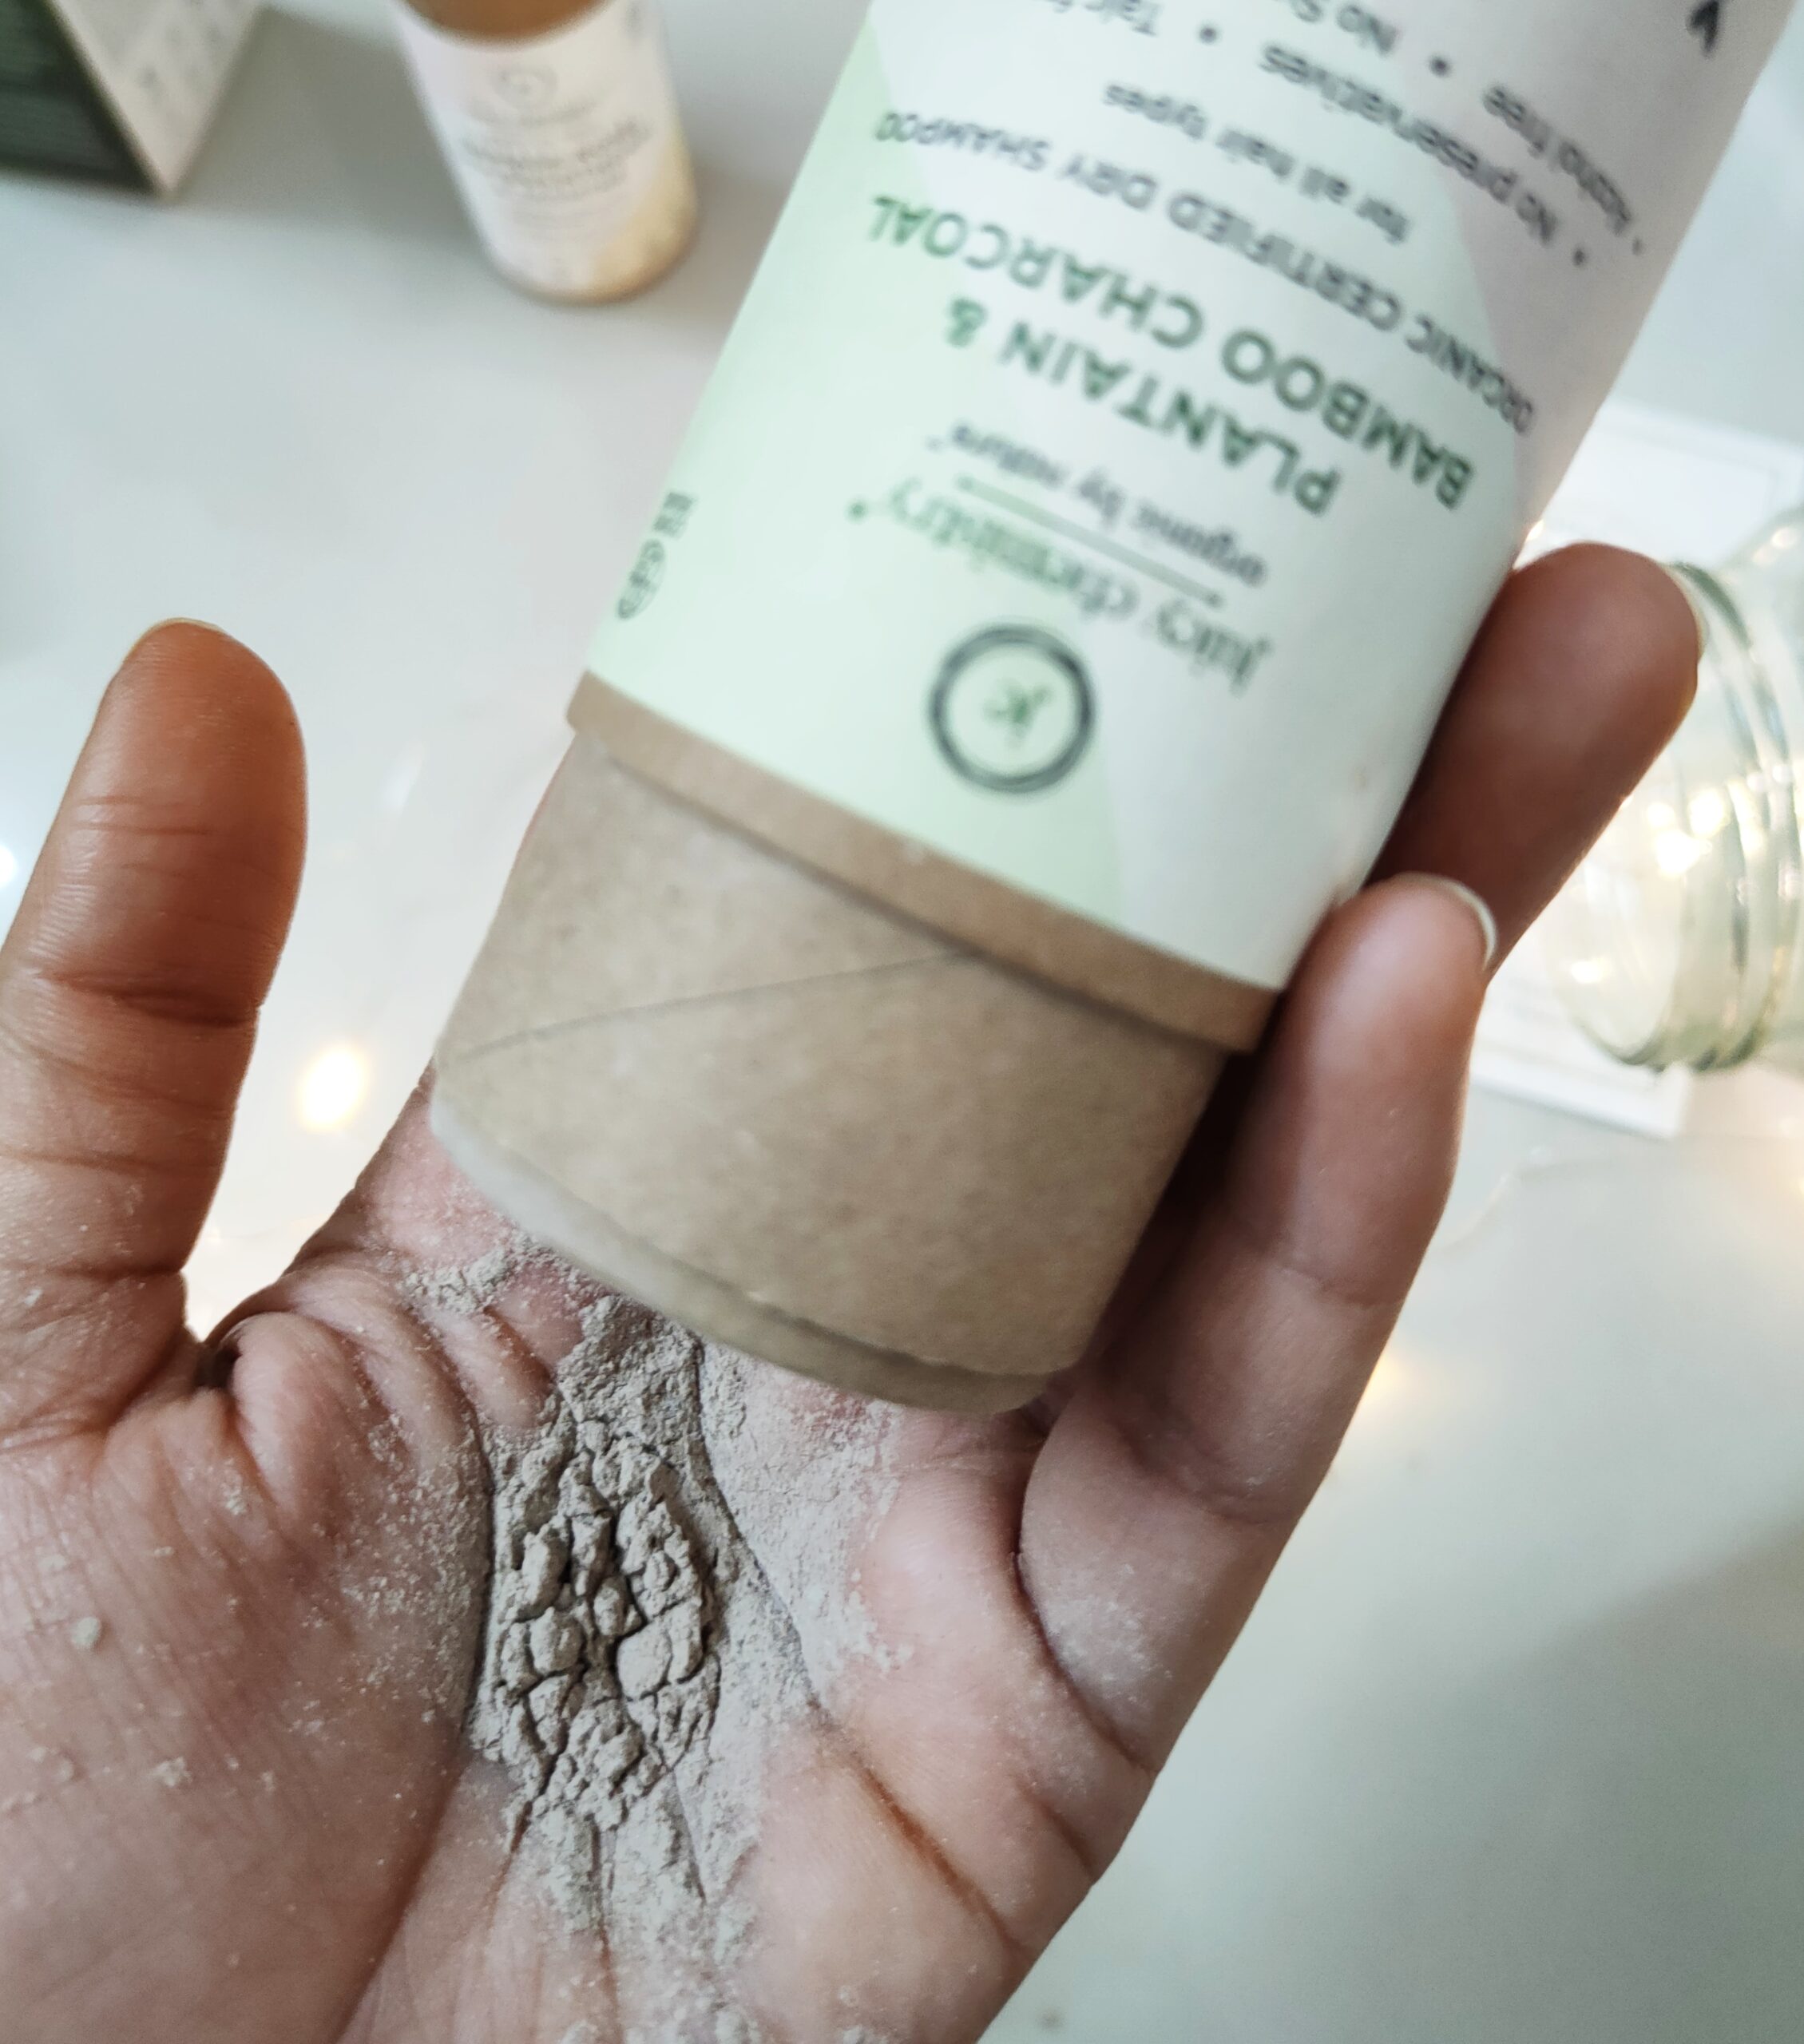 We Tried Juicy Chemistry Organic and Natural Products, and Honestly, Wow